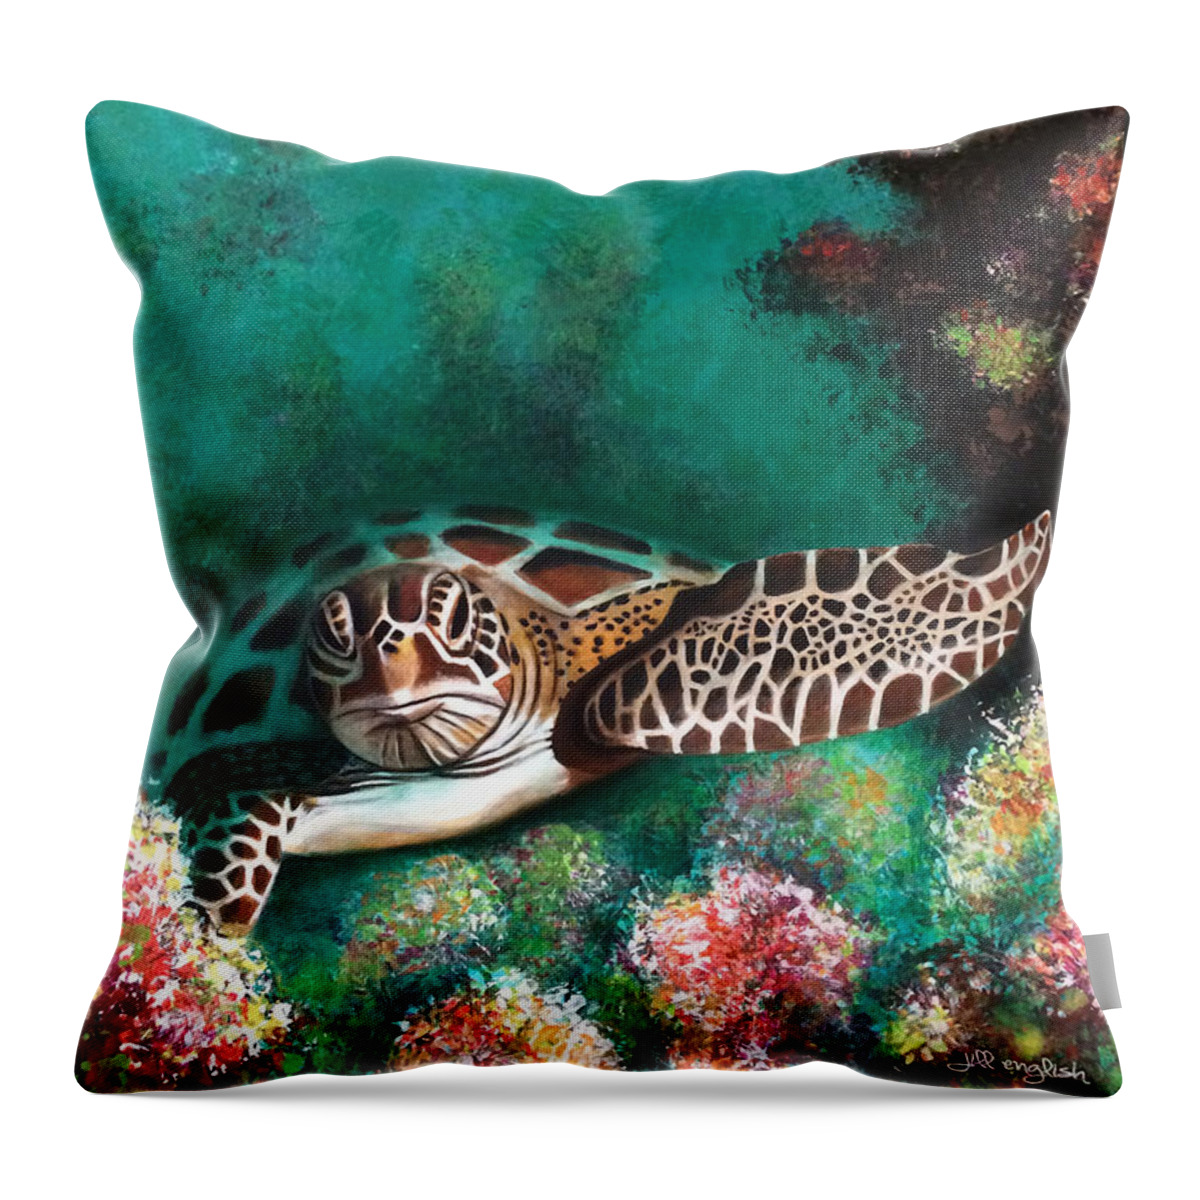 Sea Turtle Throw Pillow featuring the painting Ancient Lineage by Jill English